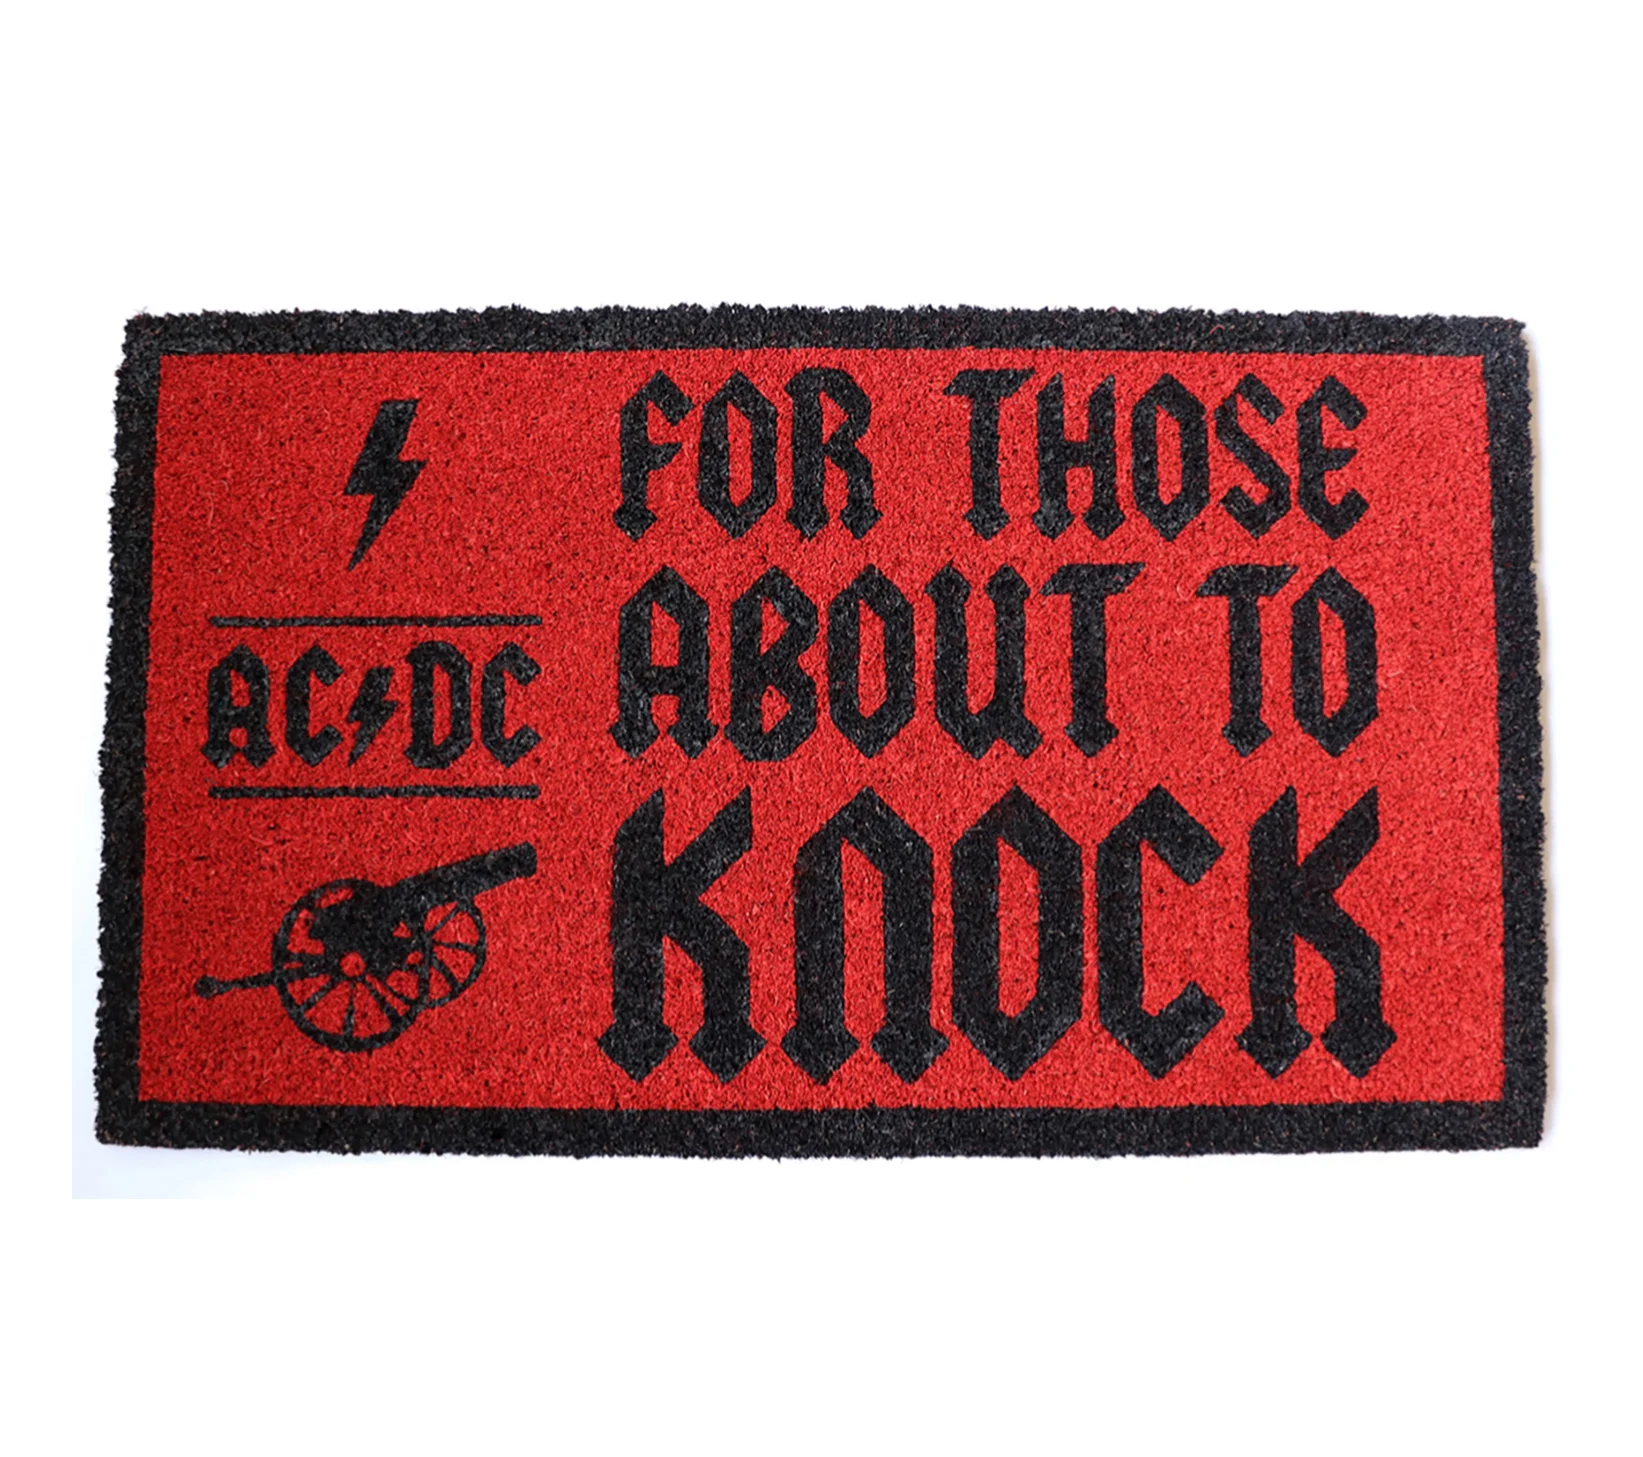 AC/DC - For Those About to Knock (17"x29" Doormat)